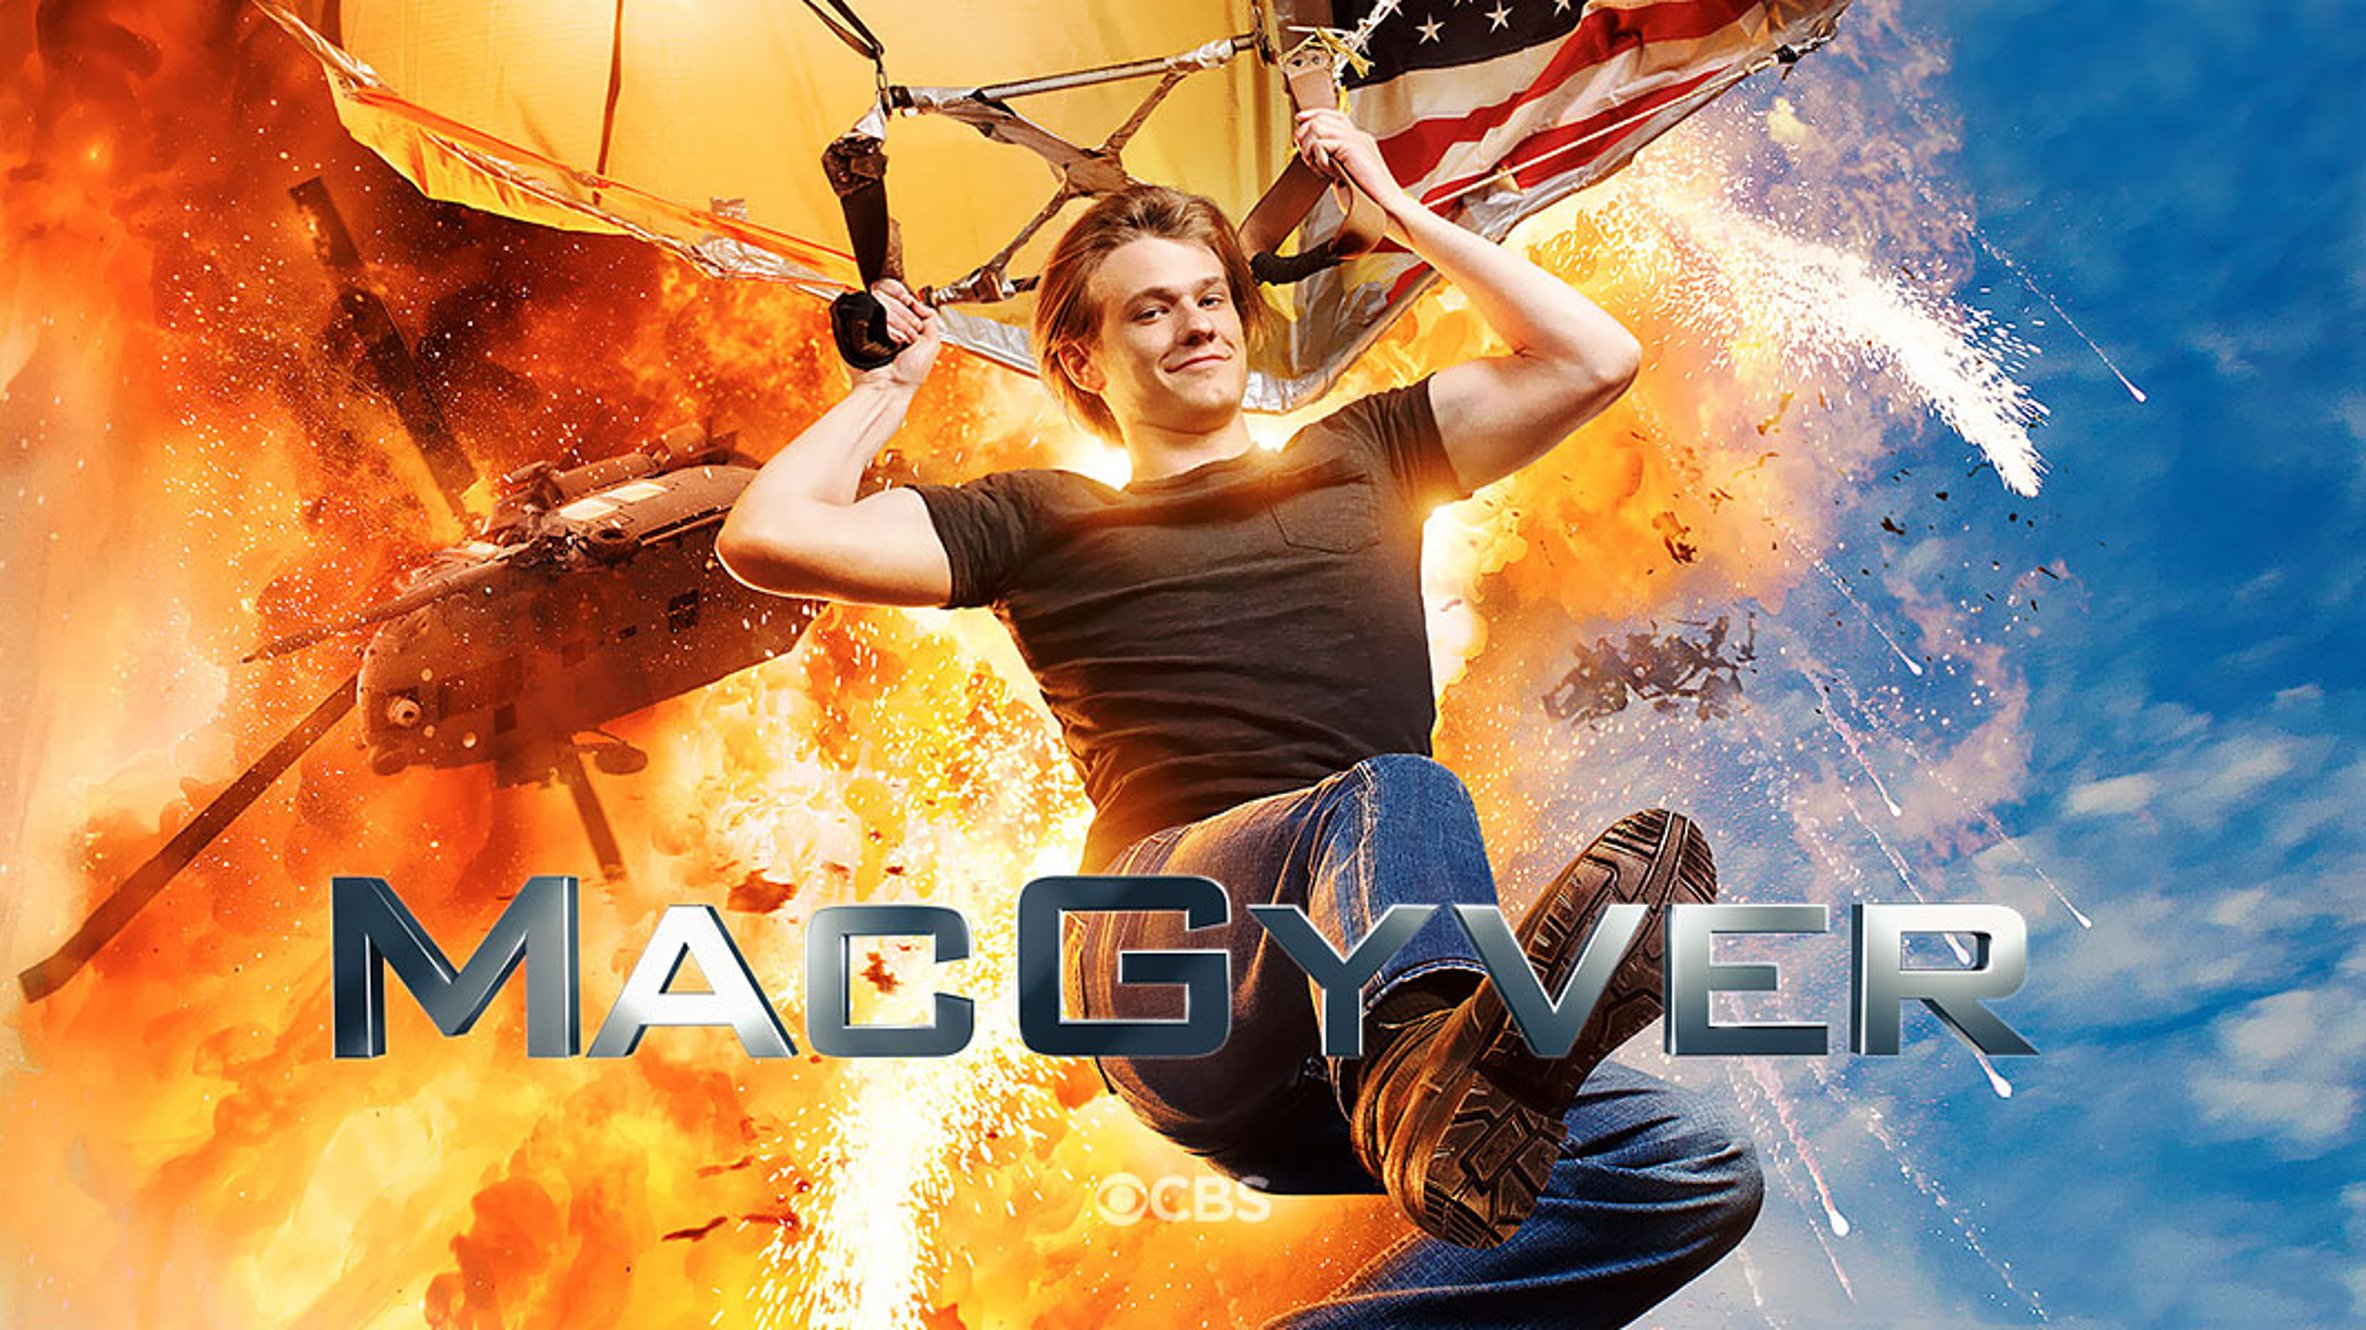 CBS’ MacGyver Casting For Soccer Players in Atlanta